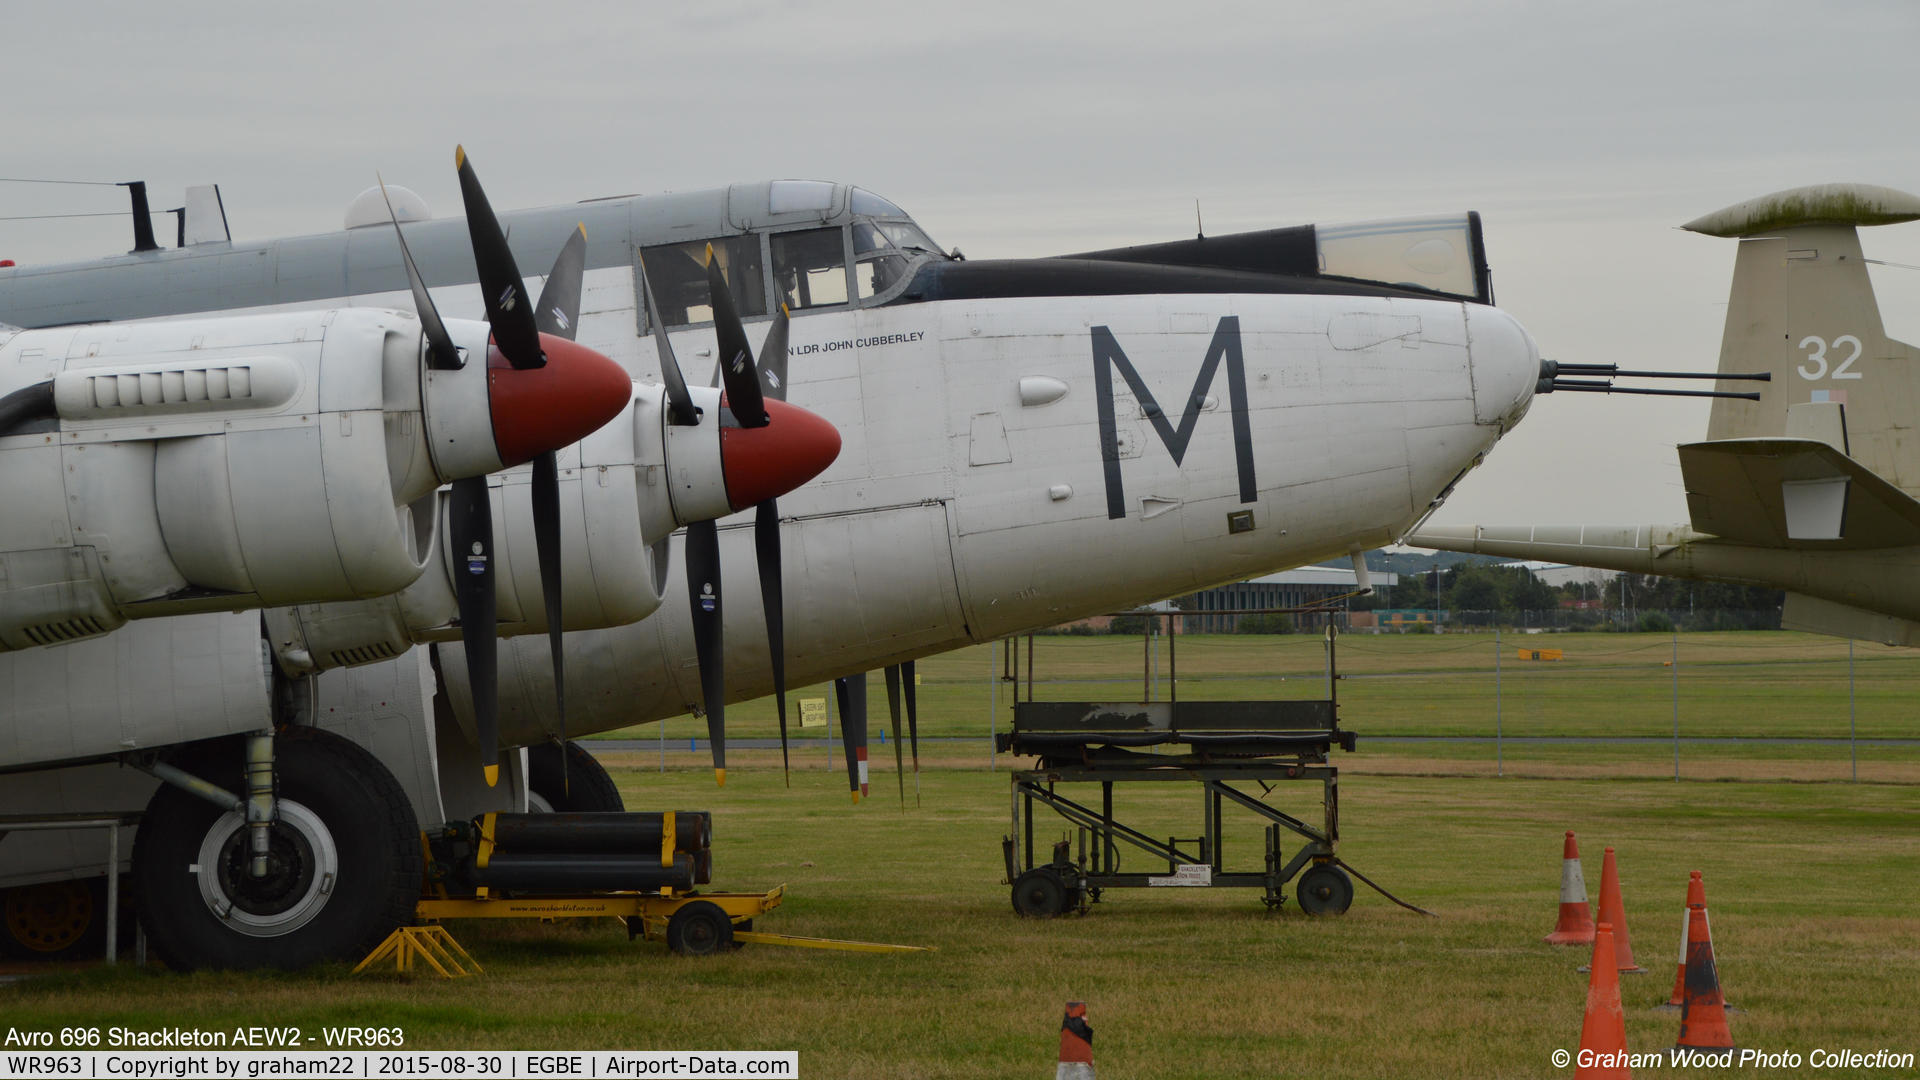 WR963, 1954 Avro 696 Shackleton AEW.2 C/N Not found WR963, Airbase Coventry